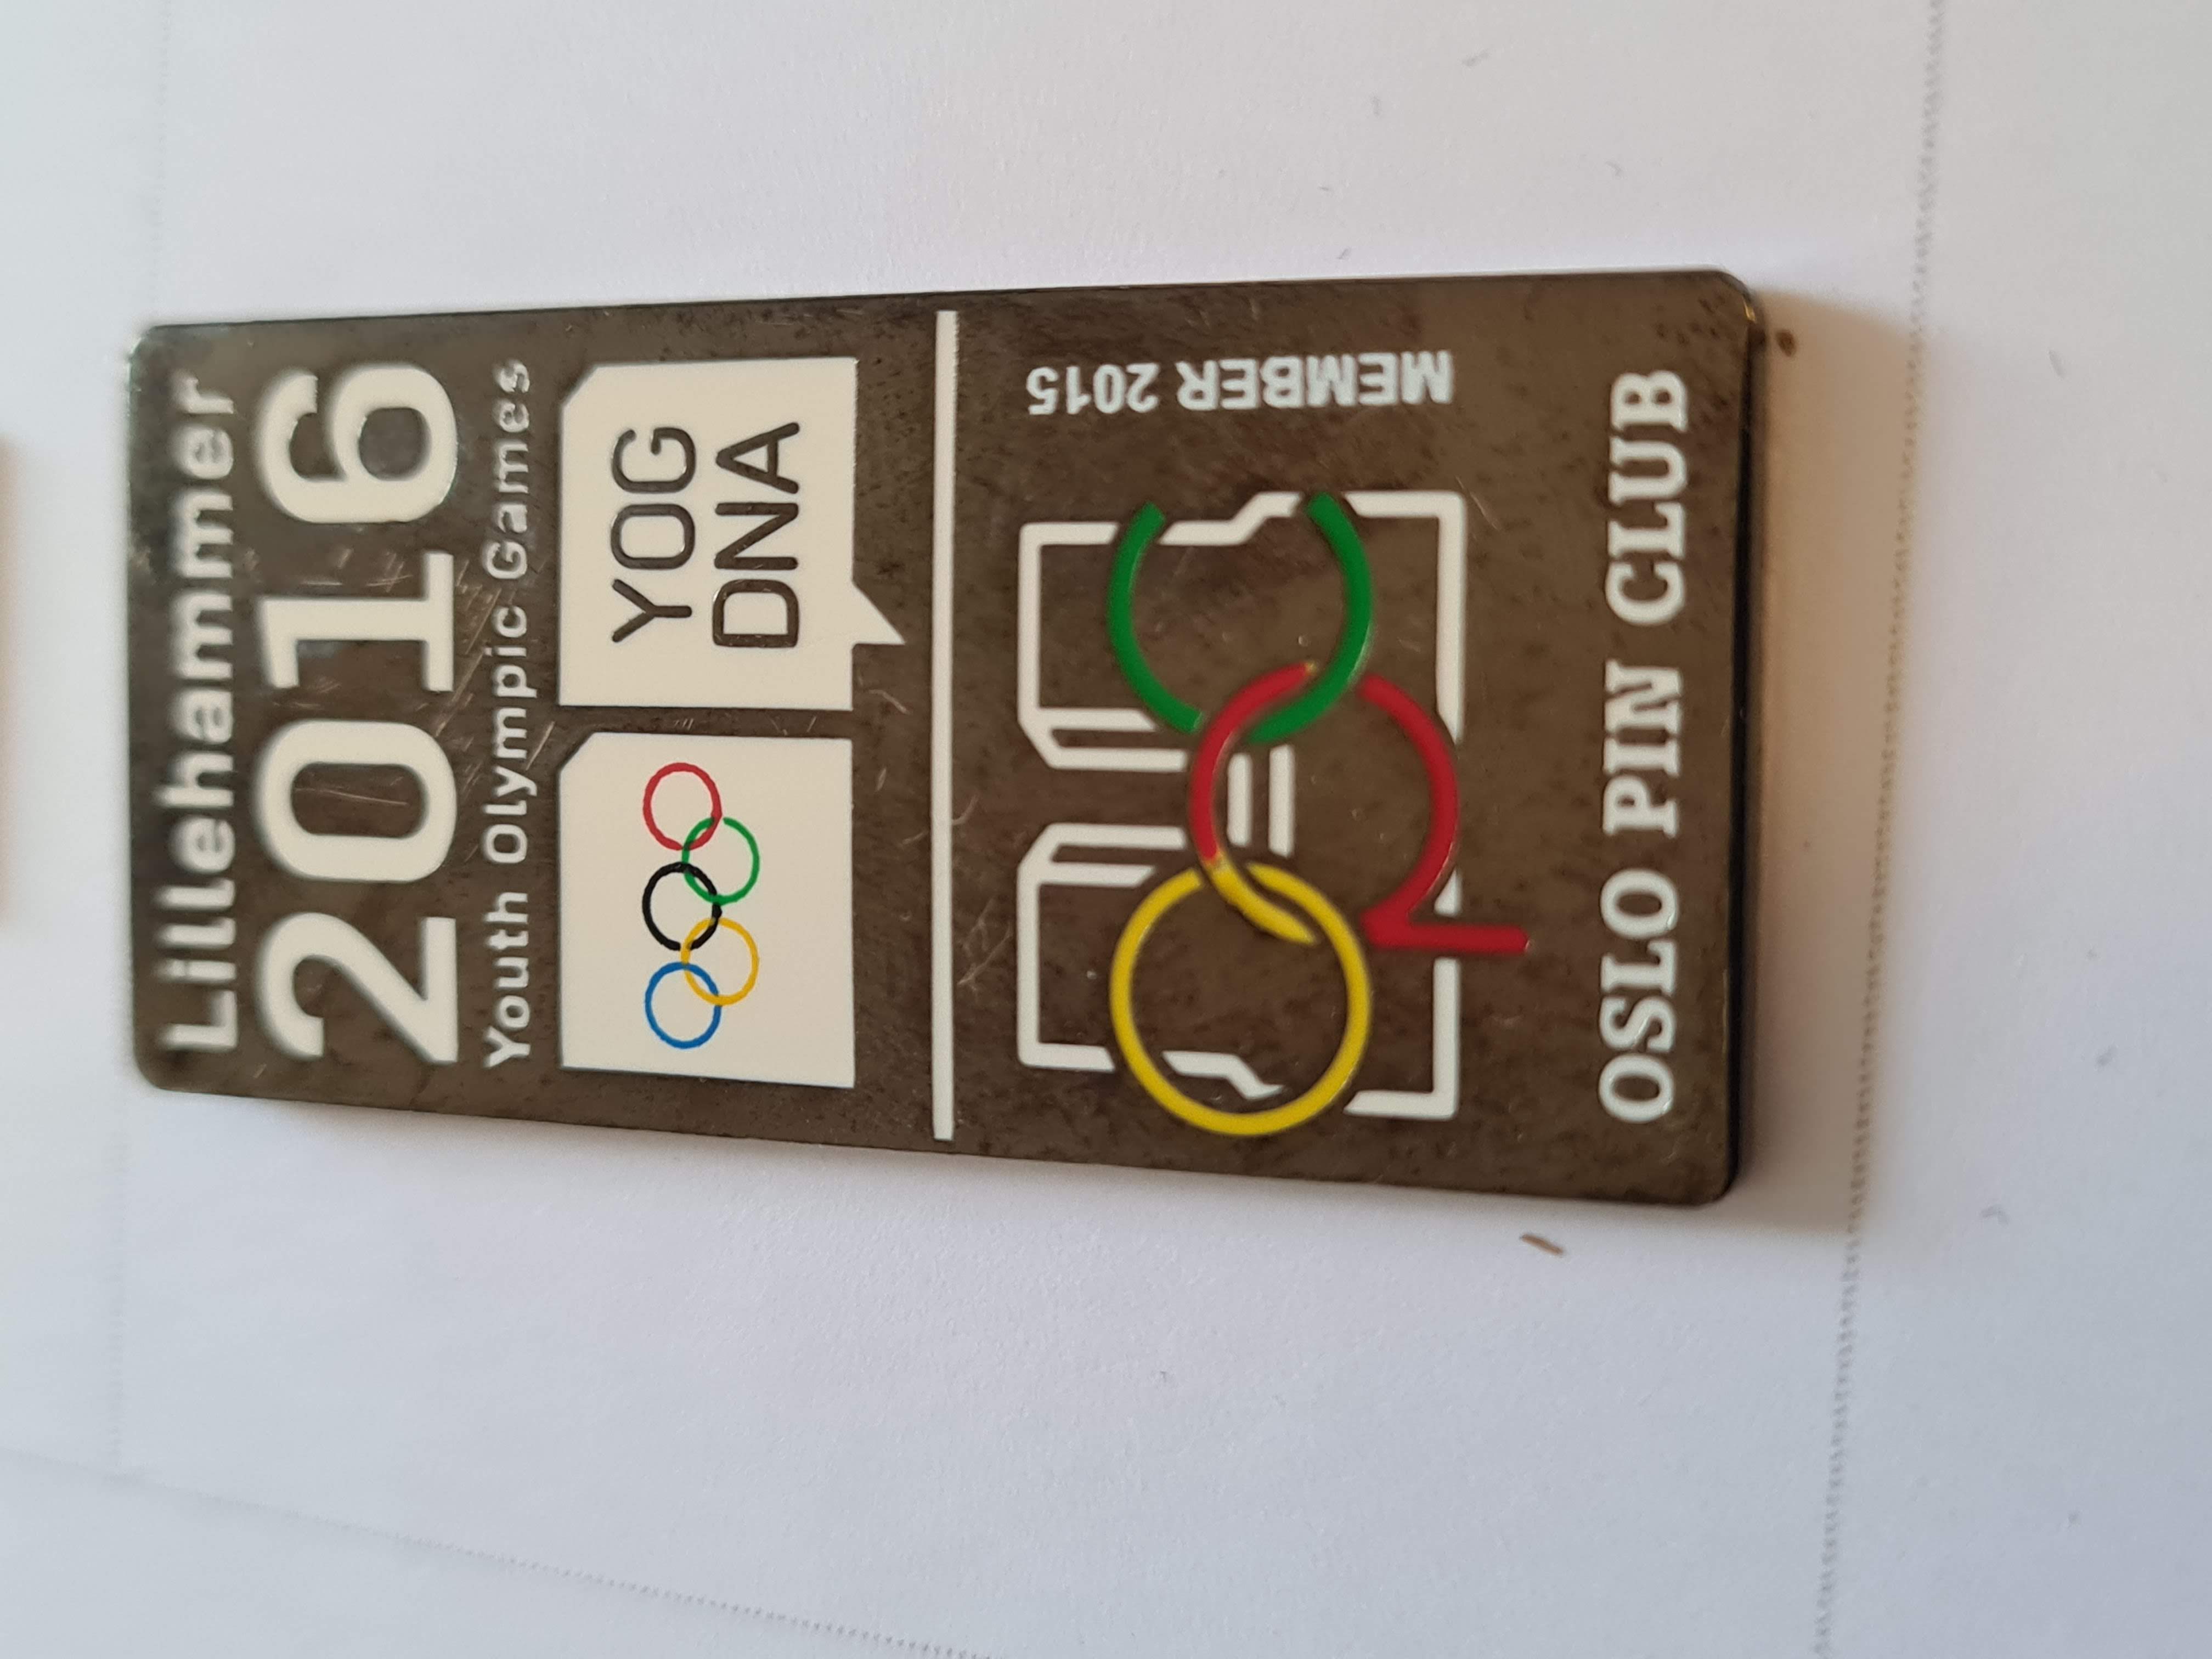 Oslo Pin Club member without number 2015 - Lillehammer 2016